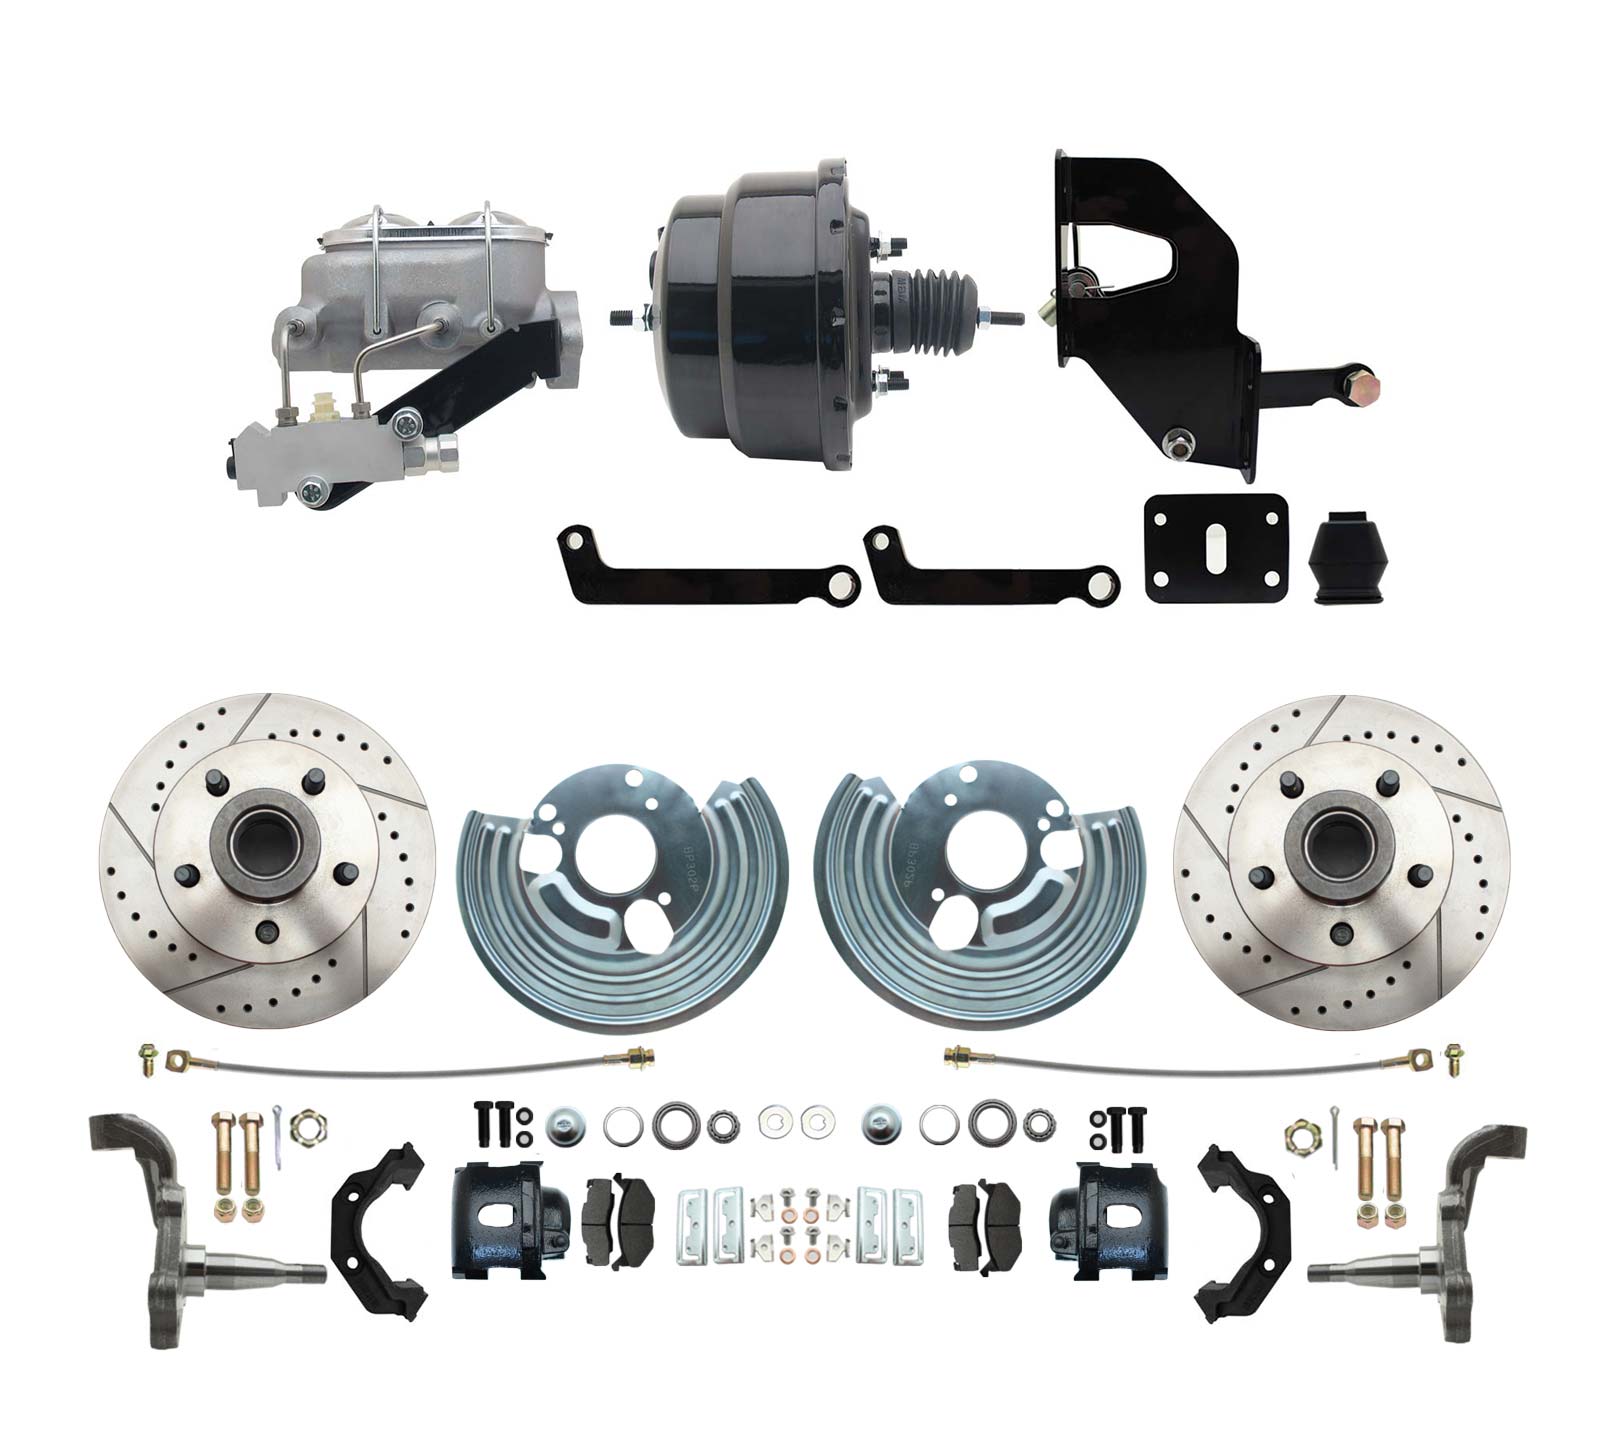 1962-72 Mopar B&E Body Front Disc Brake Conversion Kit W/ Drilled & Slotted Rotors & Powder Coated Black Calipers ( Charger, Challenger, Coronet) W/ 8 Dual Powder Coated Black Booster Conversion Kit Aluminum Dual Master  & Valve